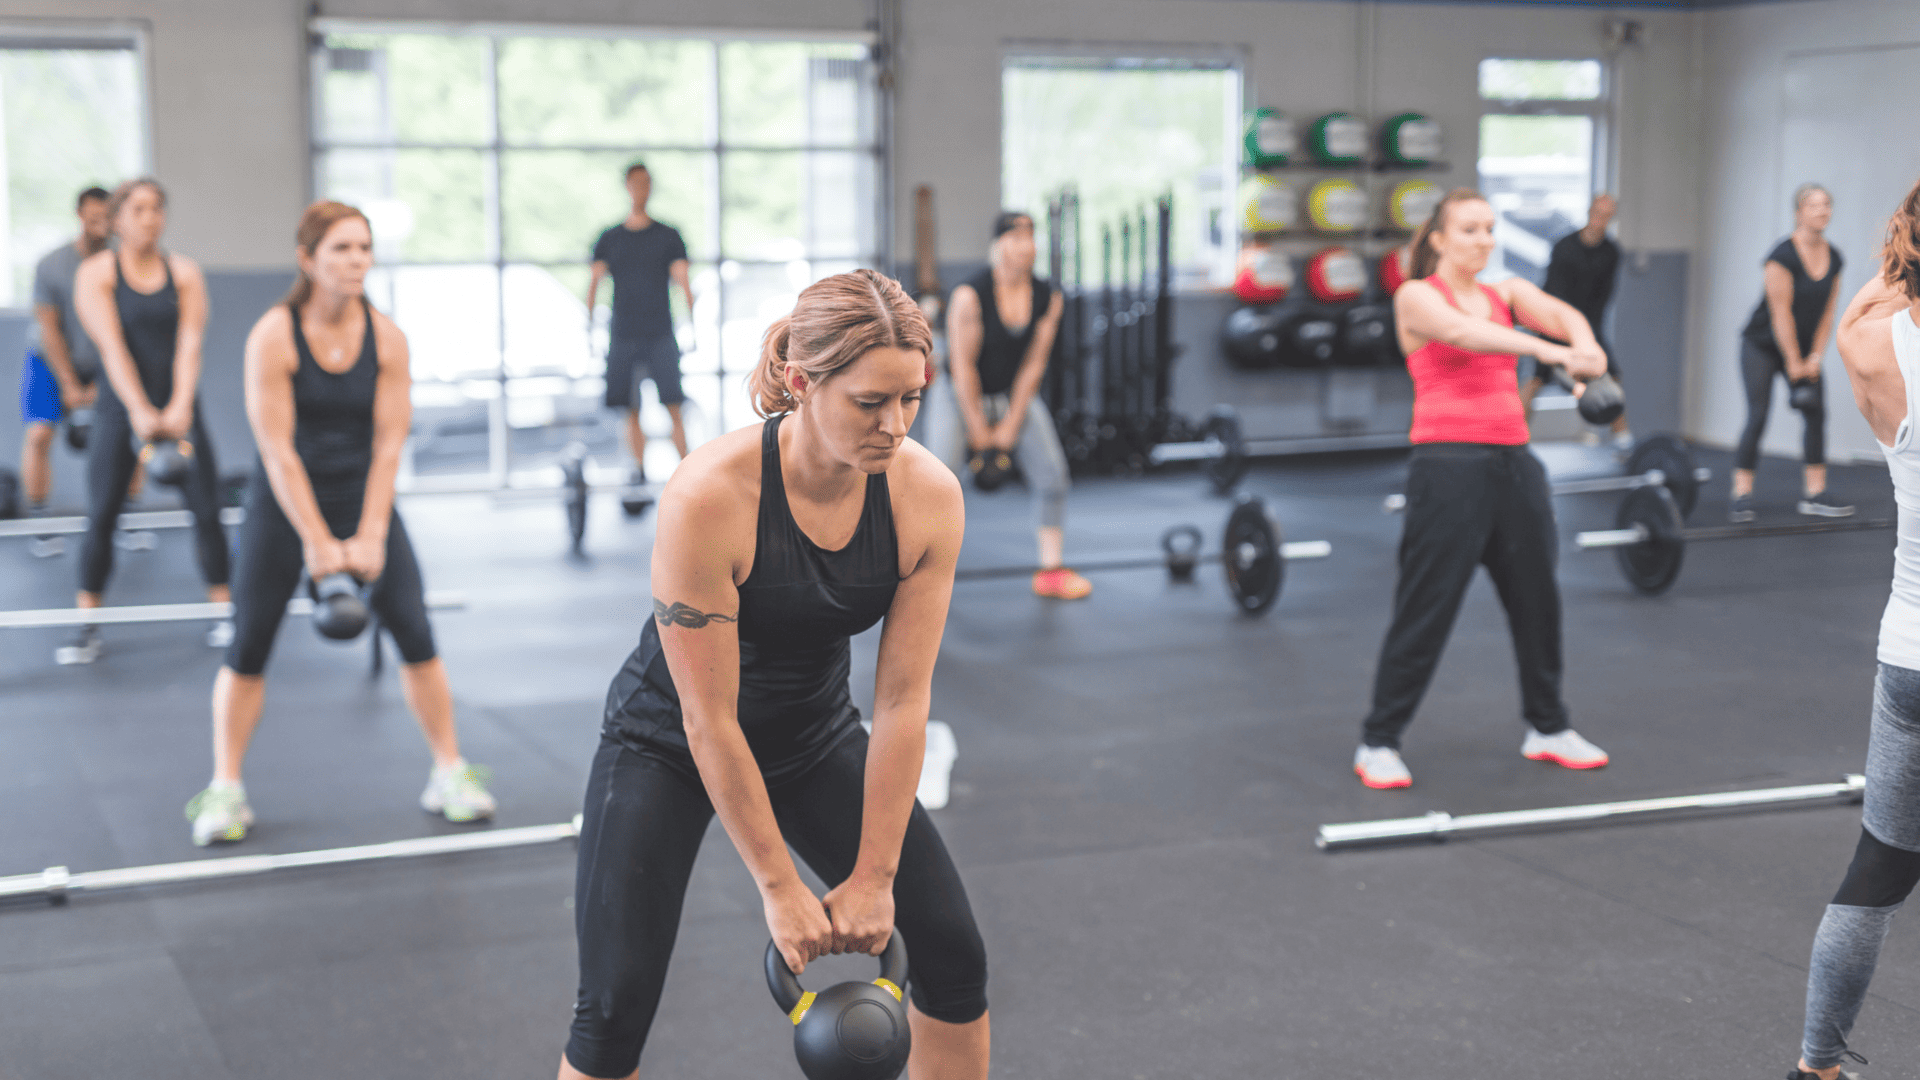 Building Community Through Fitness: A Guide To Gym Events